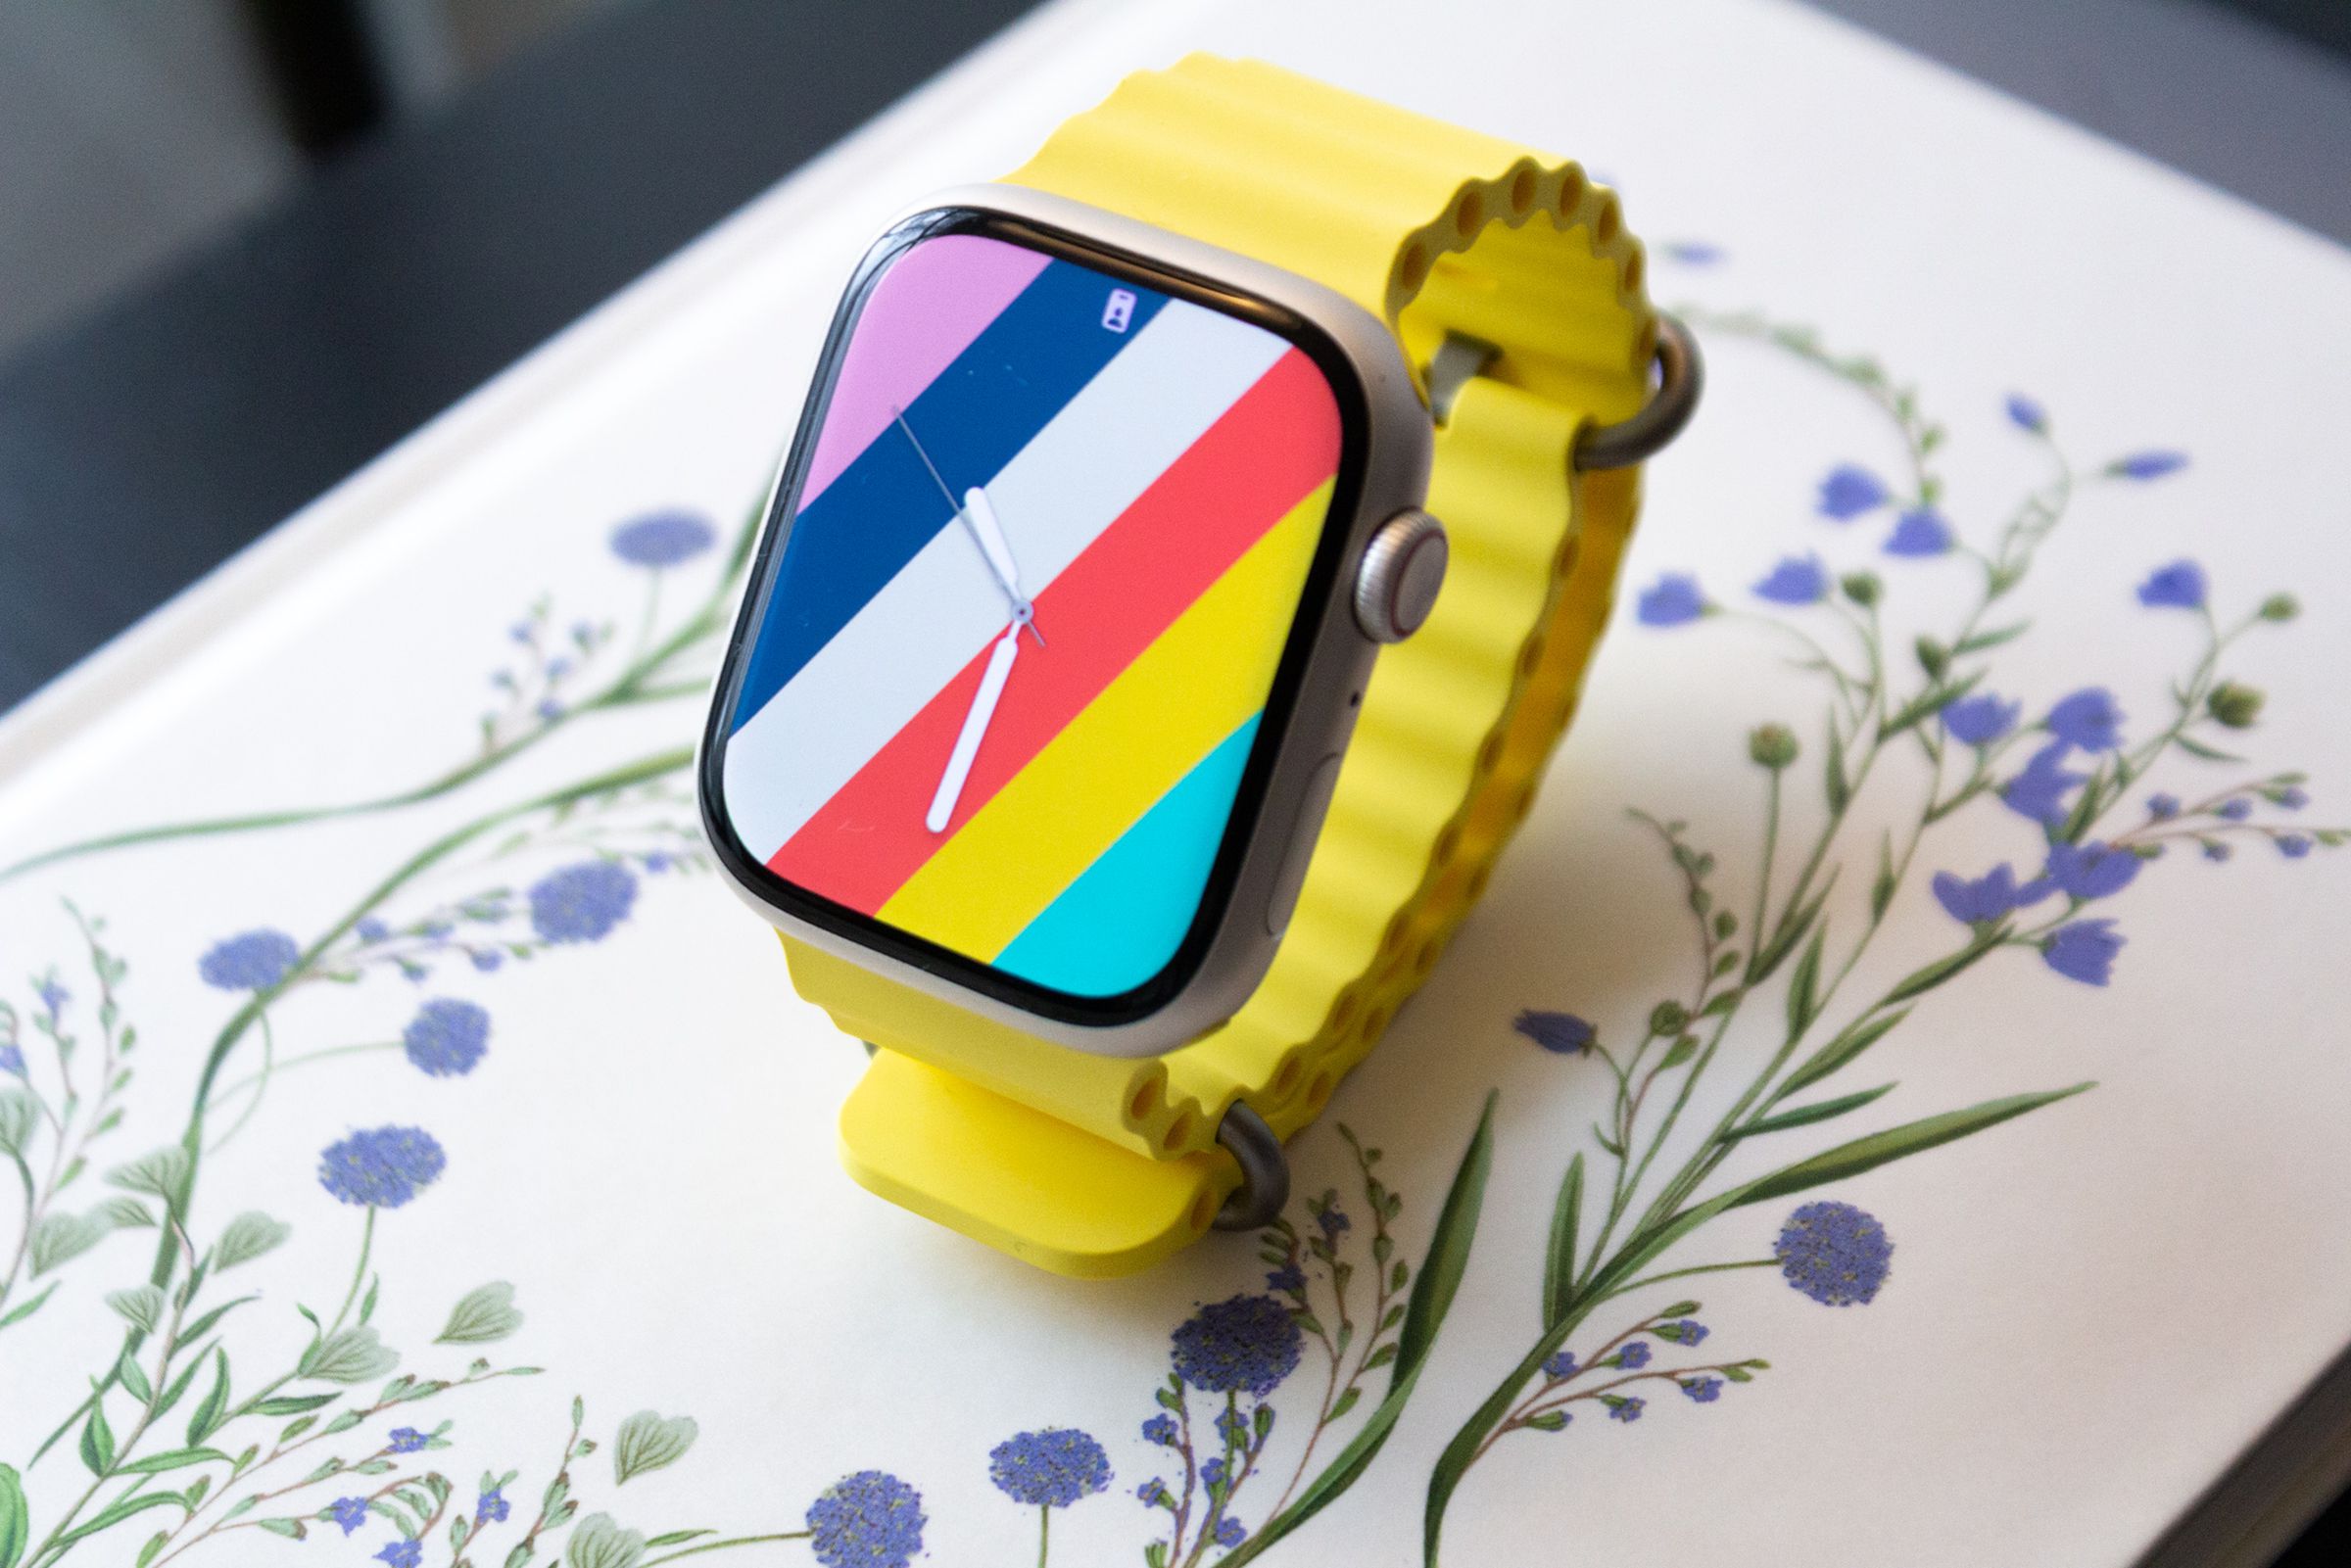 The Apple Watch Series 8 with the yellow Ocean Band on top of a book